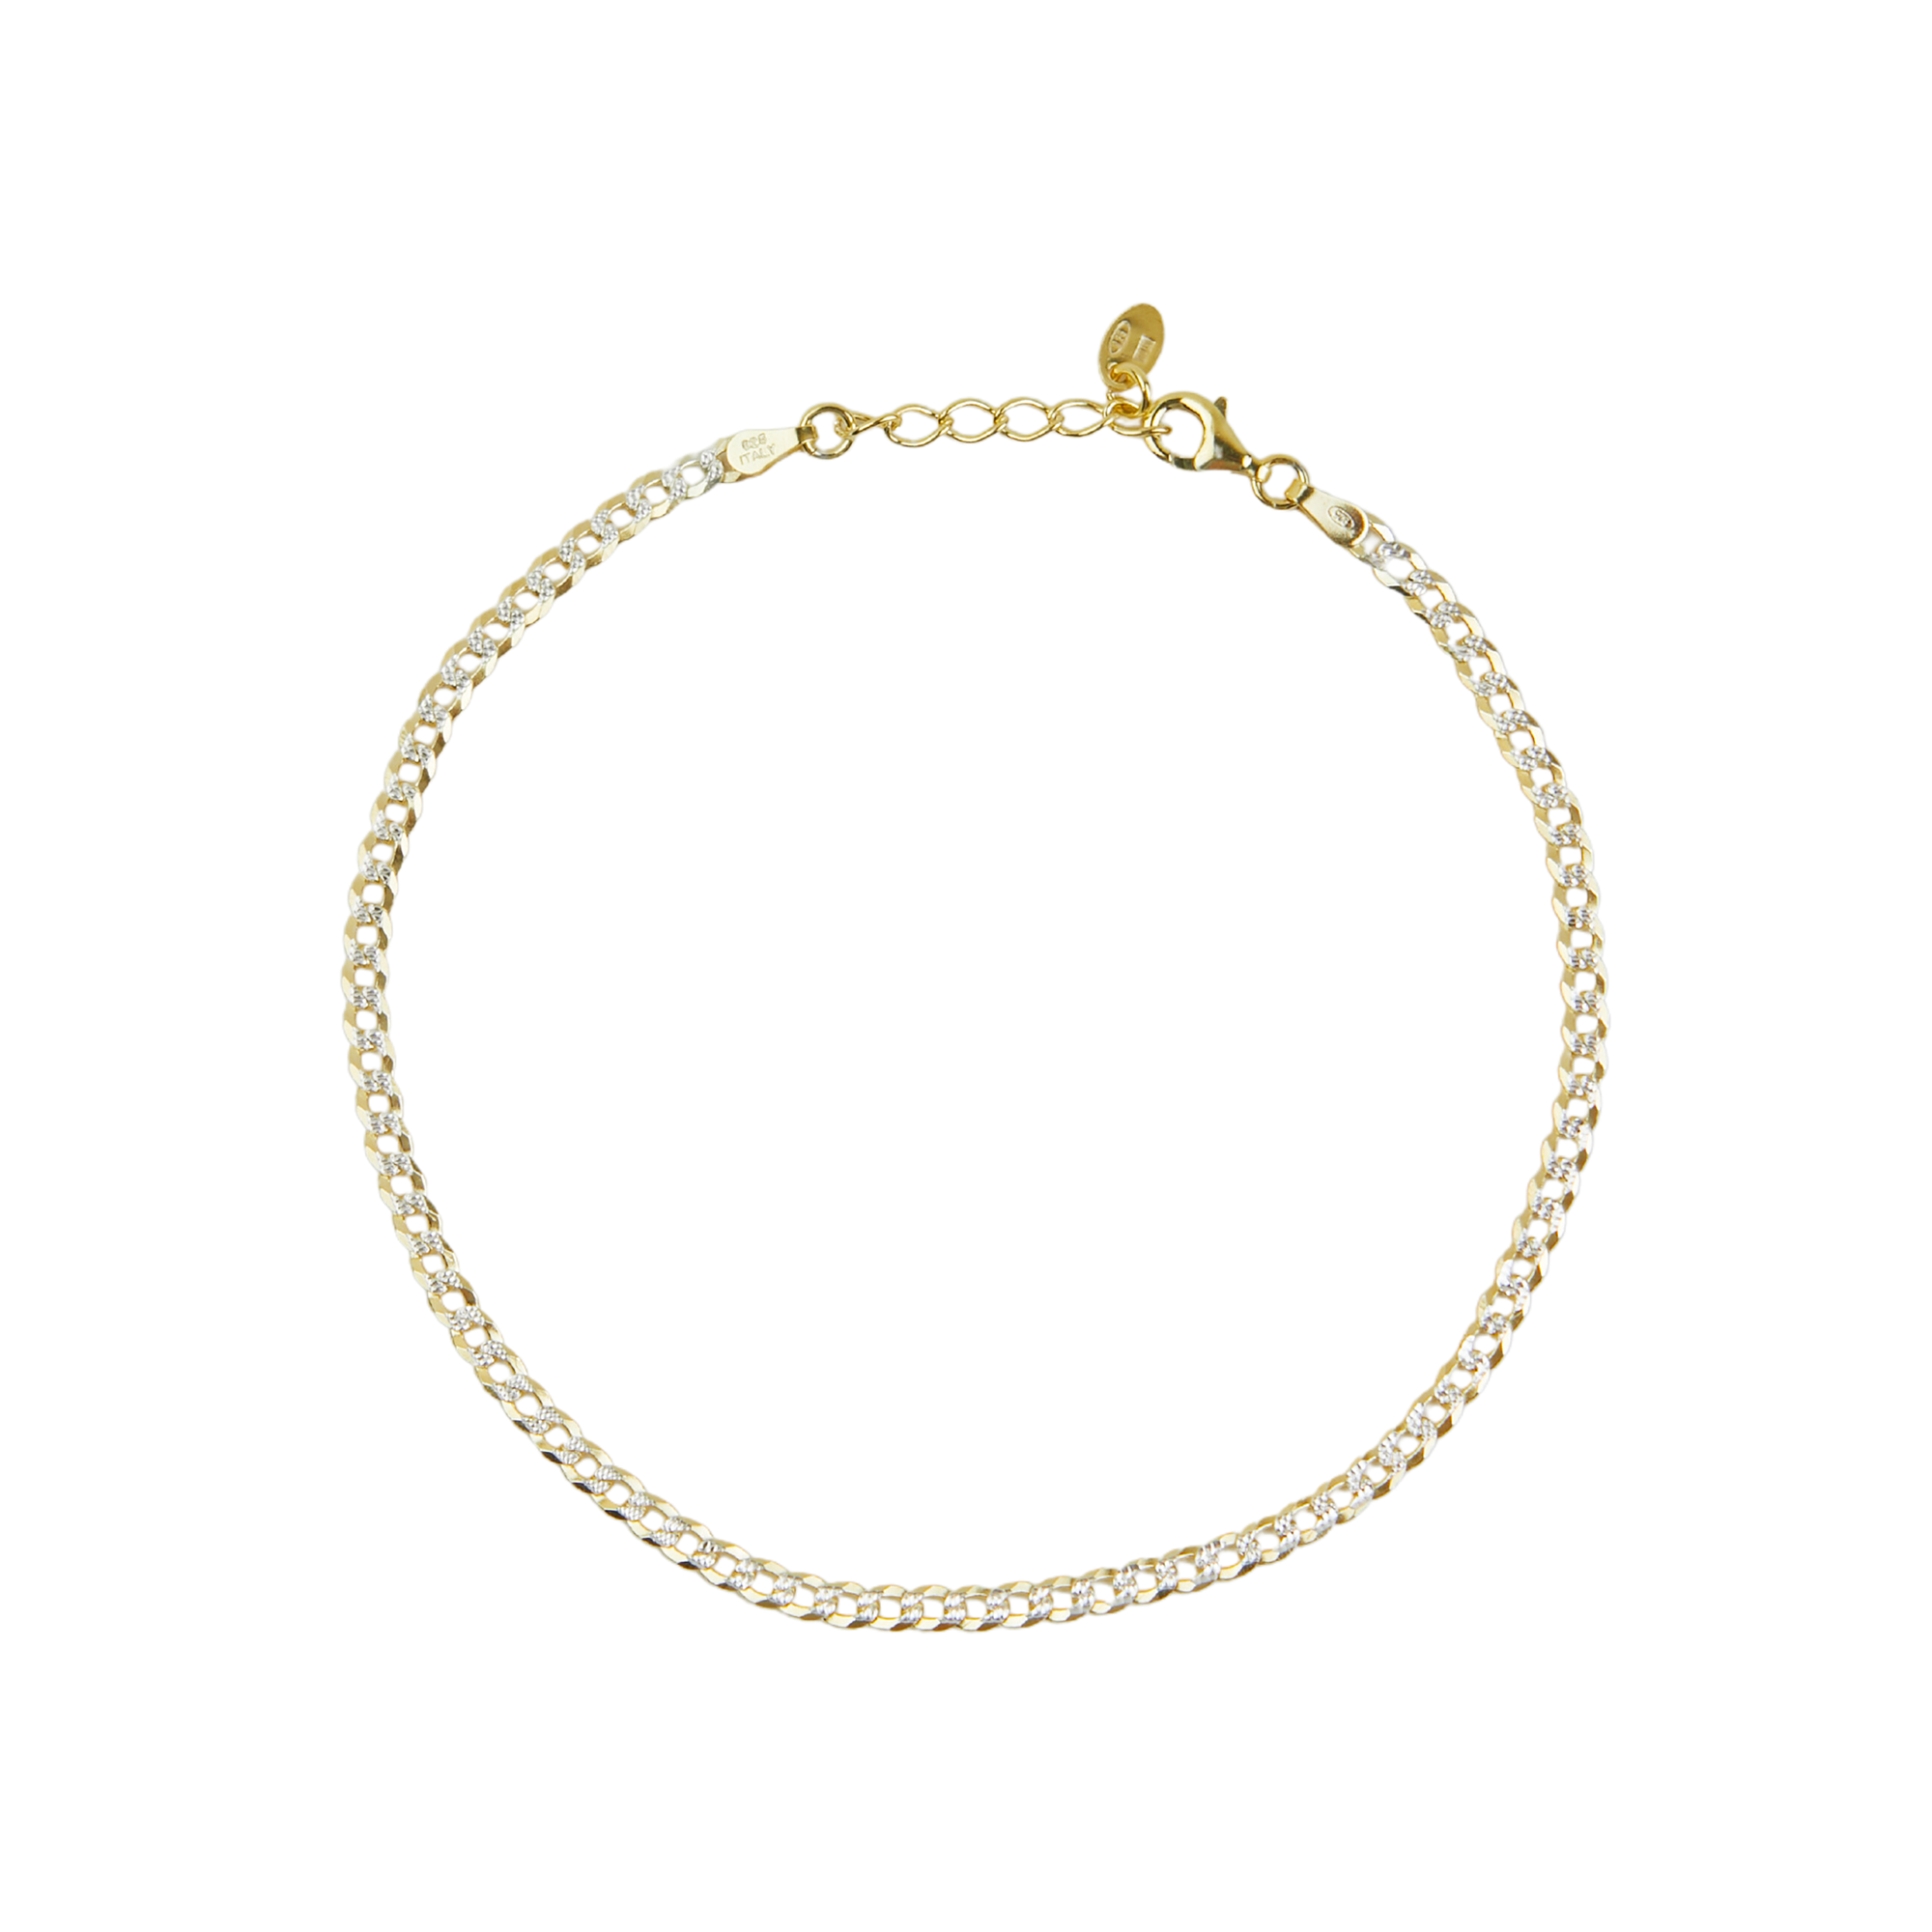 THE TWO TONE PAVE CURB CHAIN ANKLET